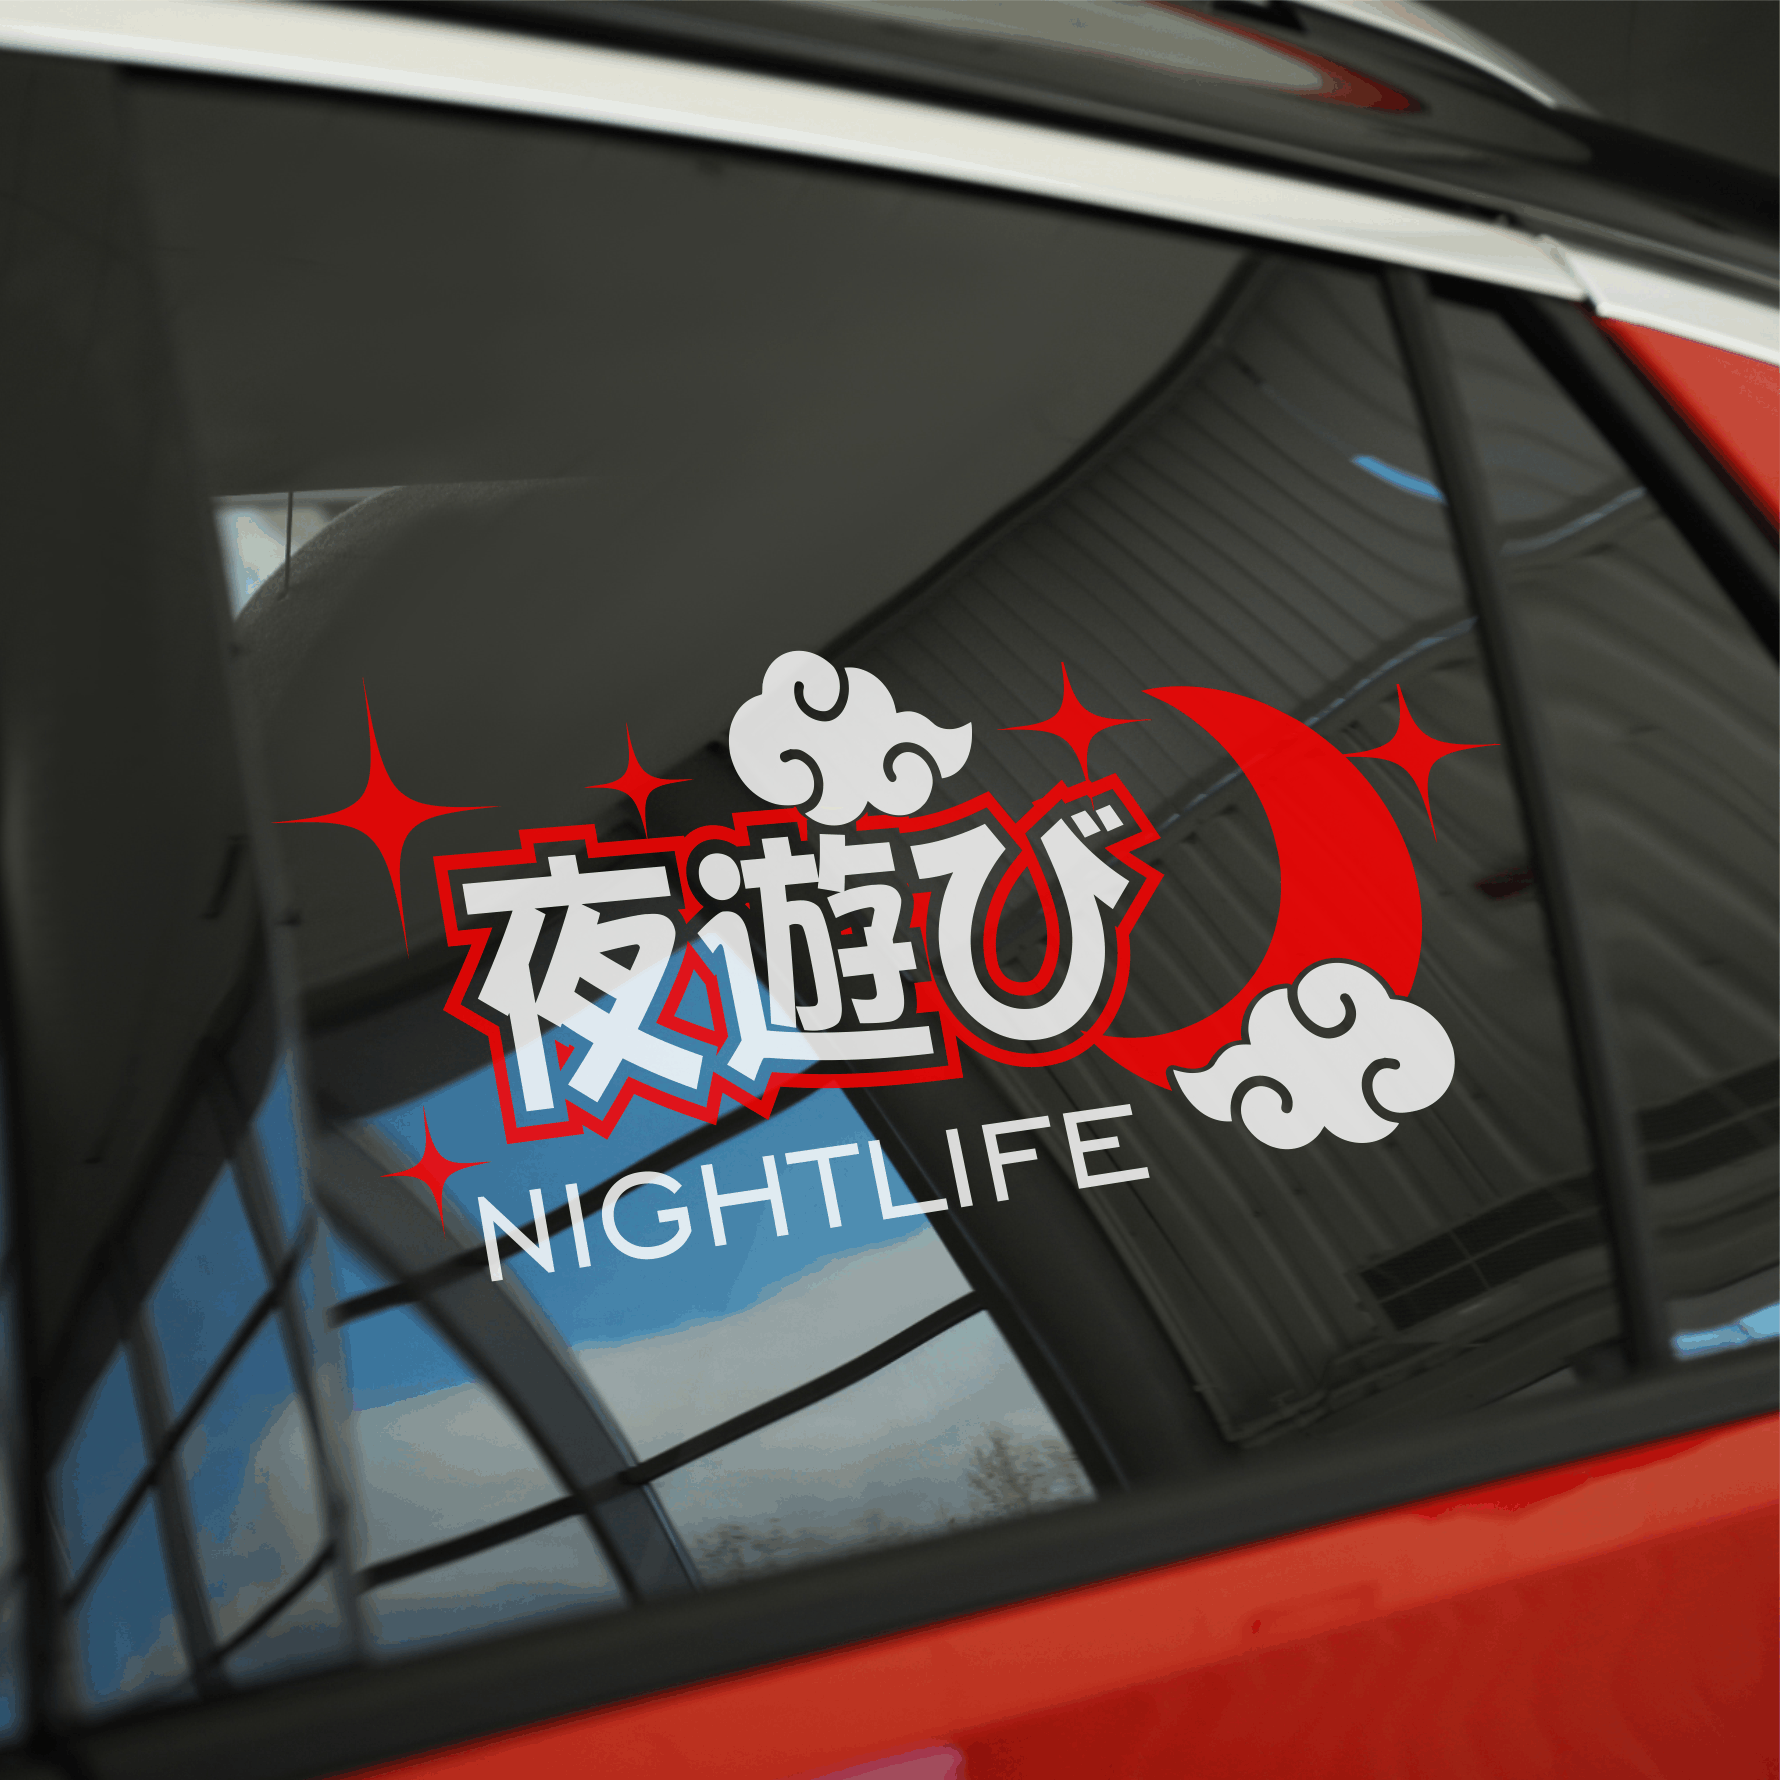 Nightlife 2 colors -Rear Windshield decal sticker